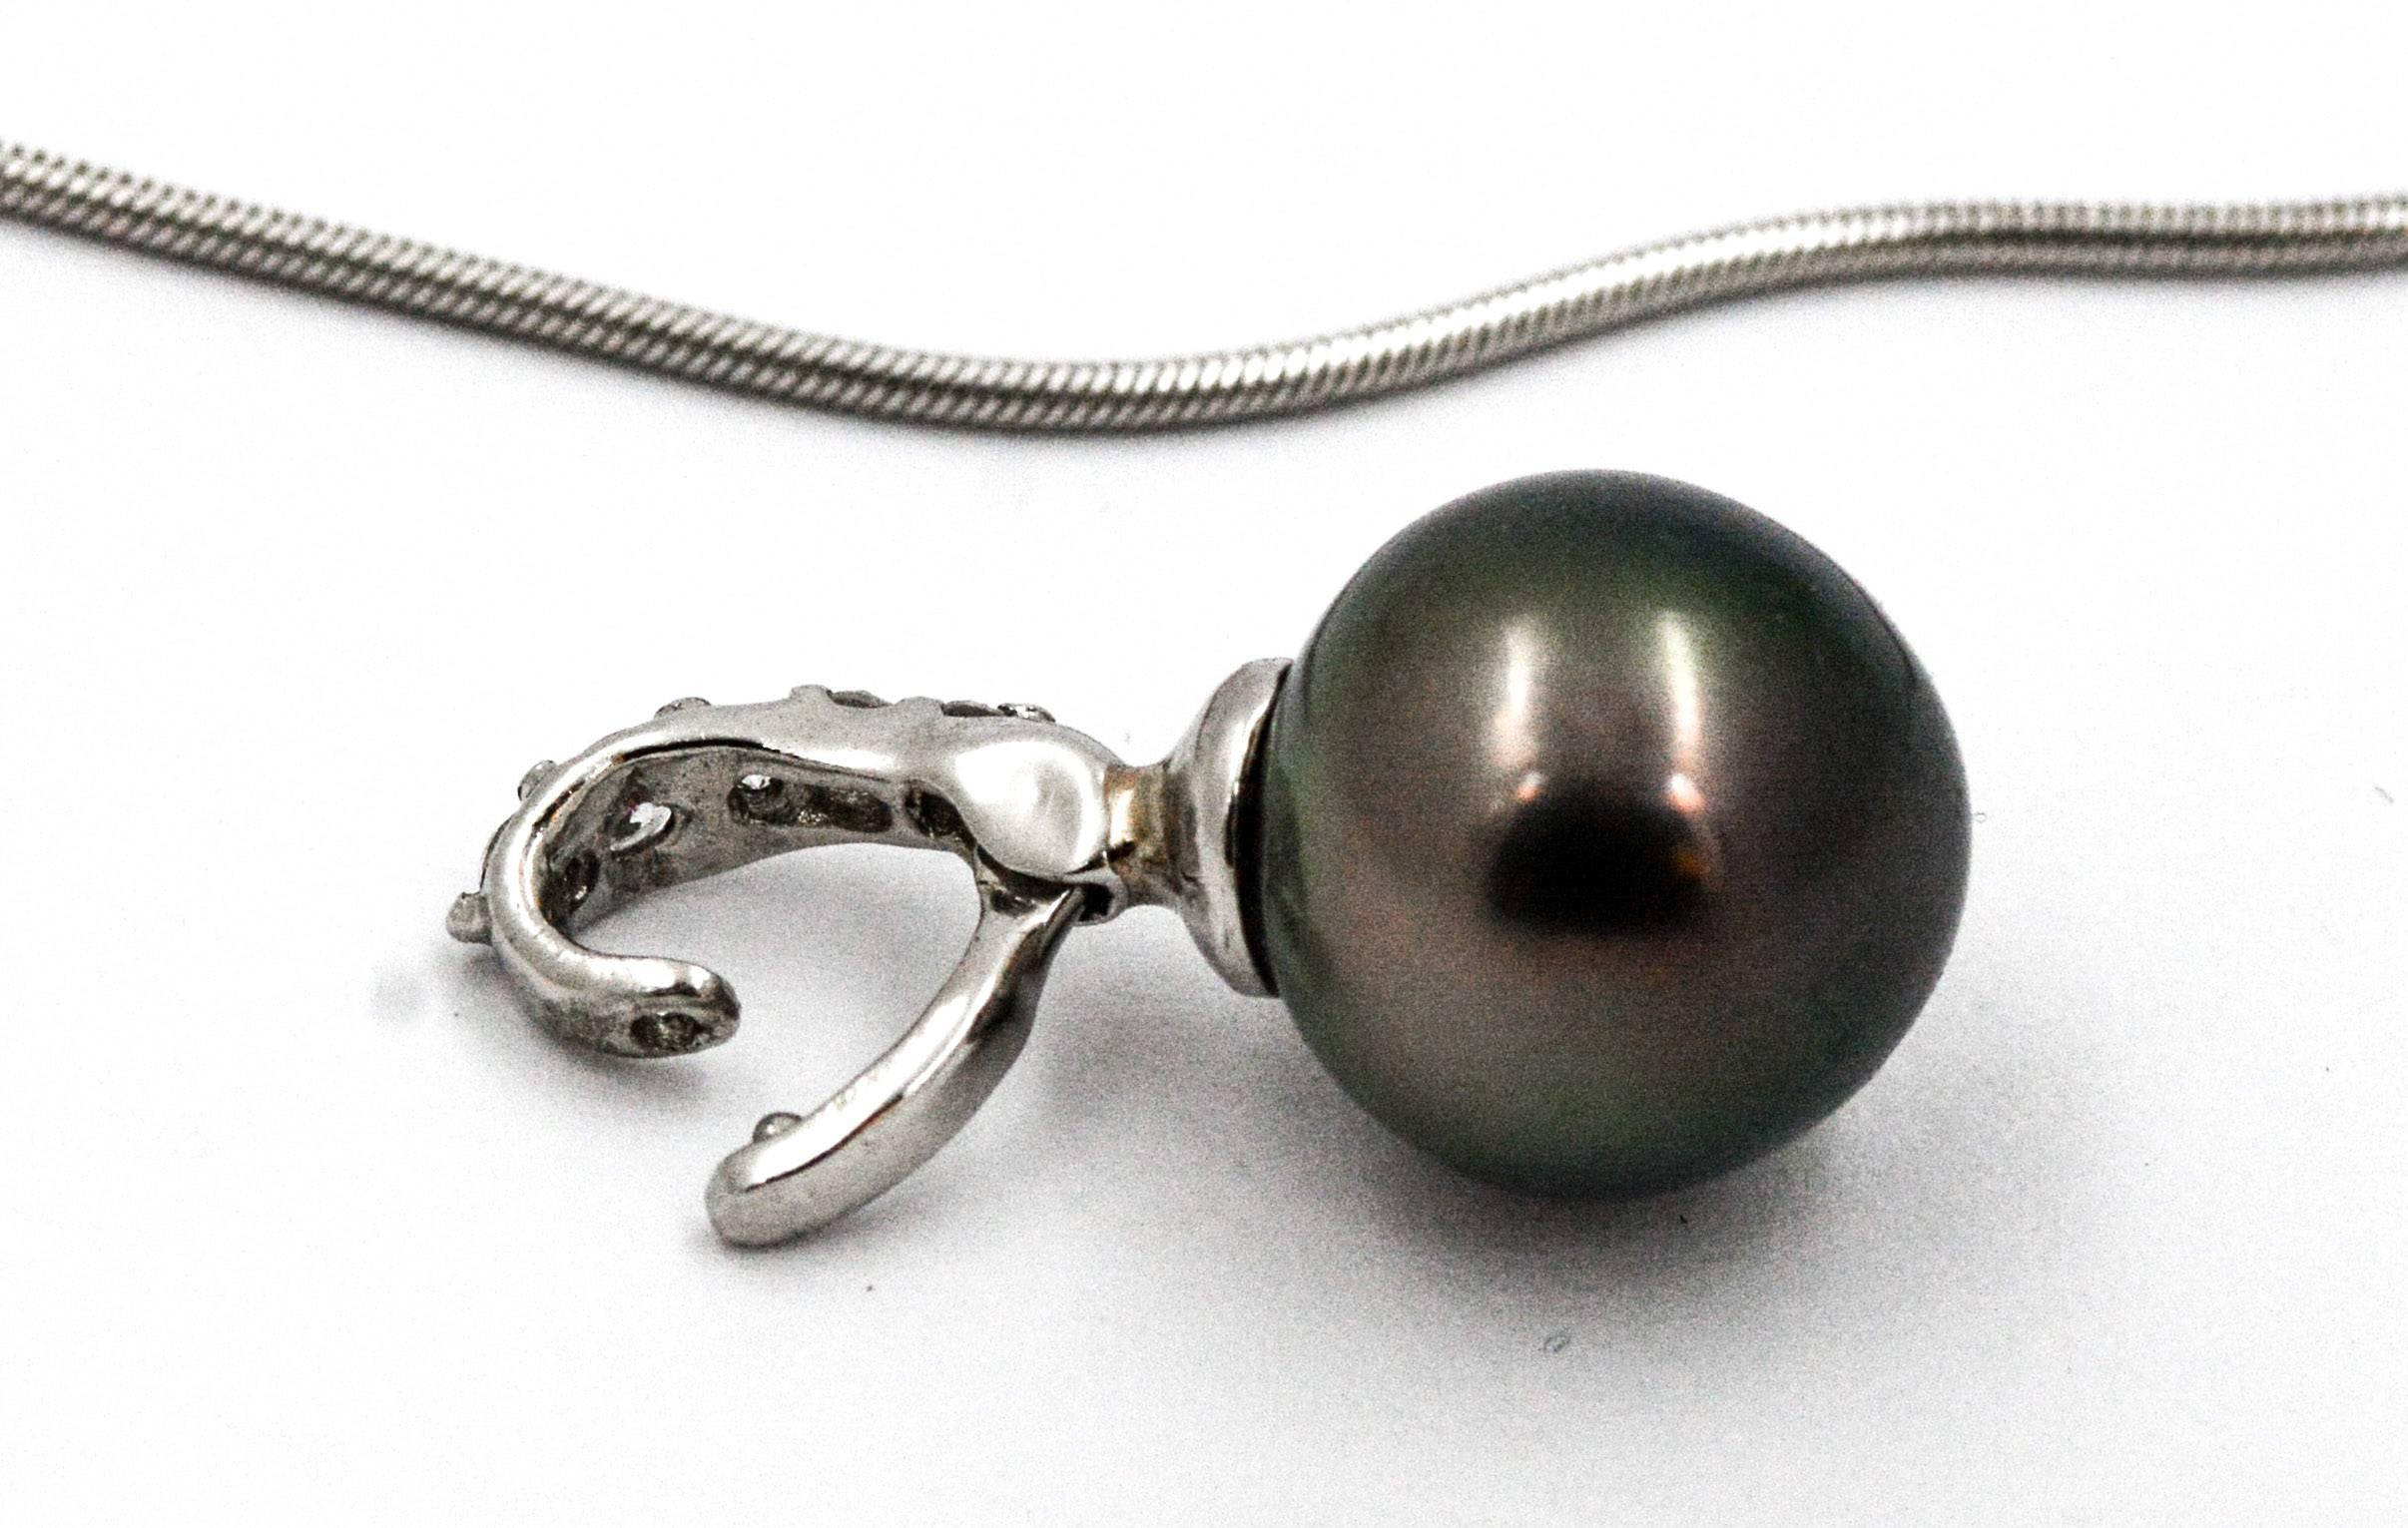 Show off your modern charm wearing this classic 10.24 mm cultured black pearl necklace. The cultured black pearl pendant is crafted in 18kt white gold with five round brilliant cut diamonds bead set in a tapered bail.  The diamonds have an